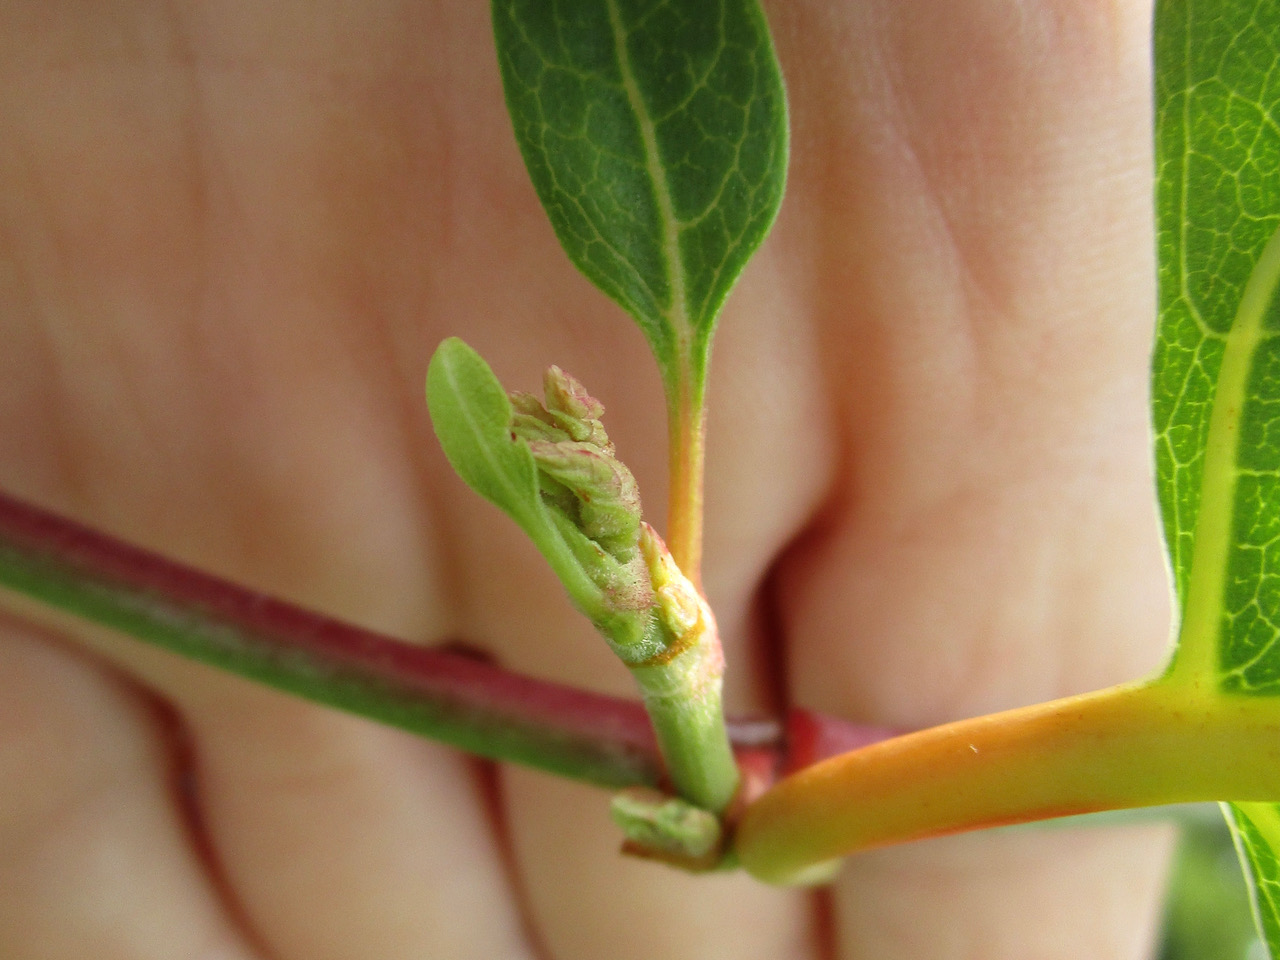 First sign of flower buds, Bohemian knotweed